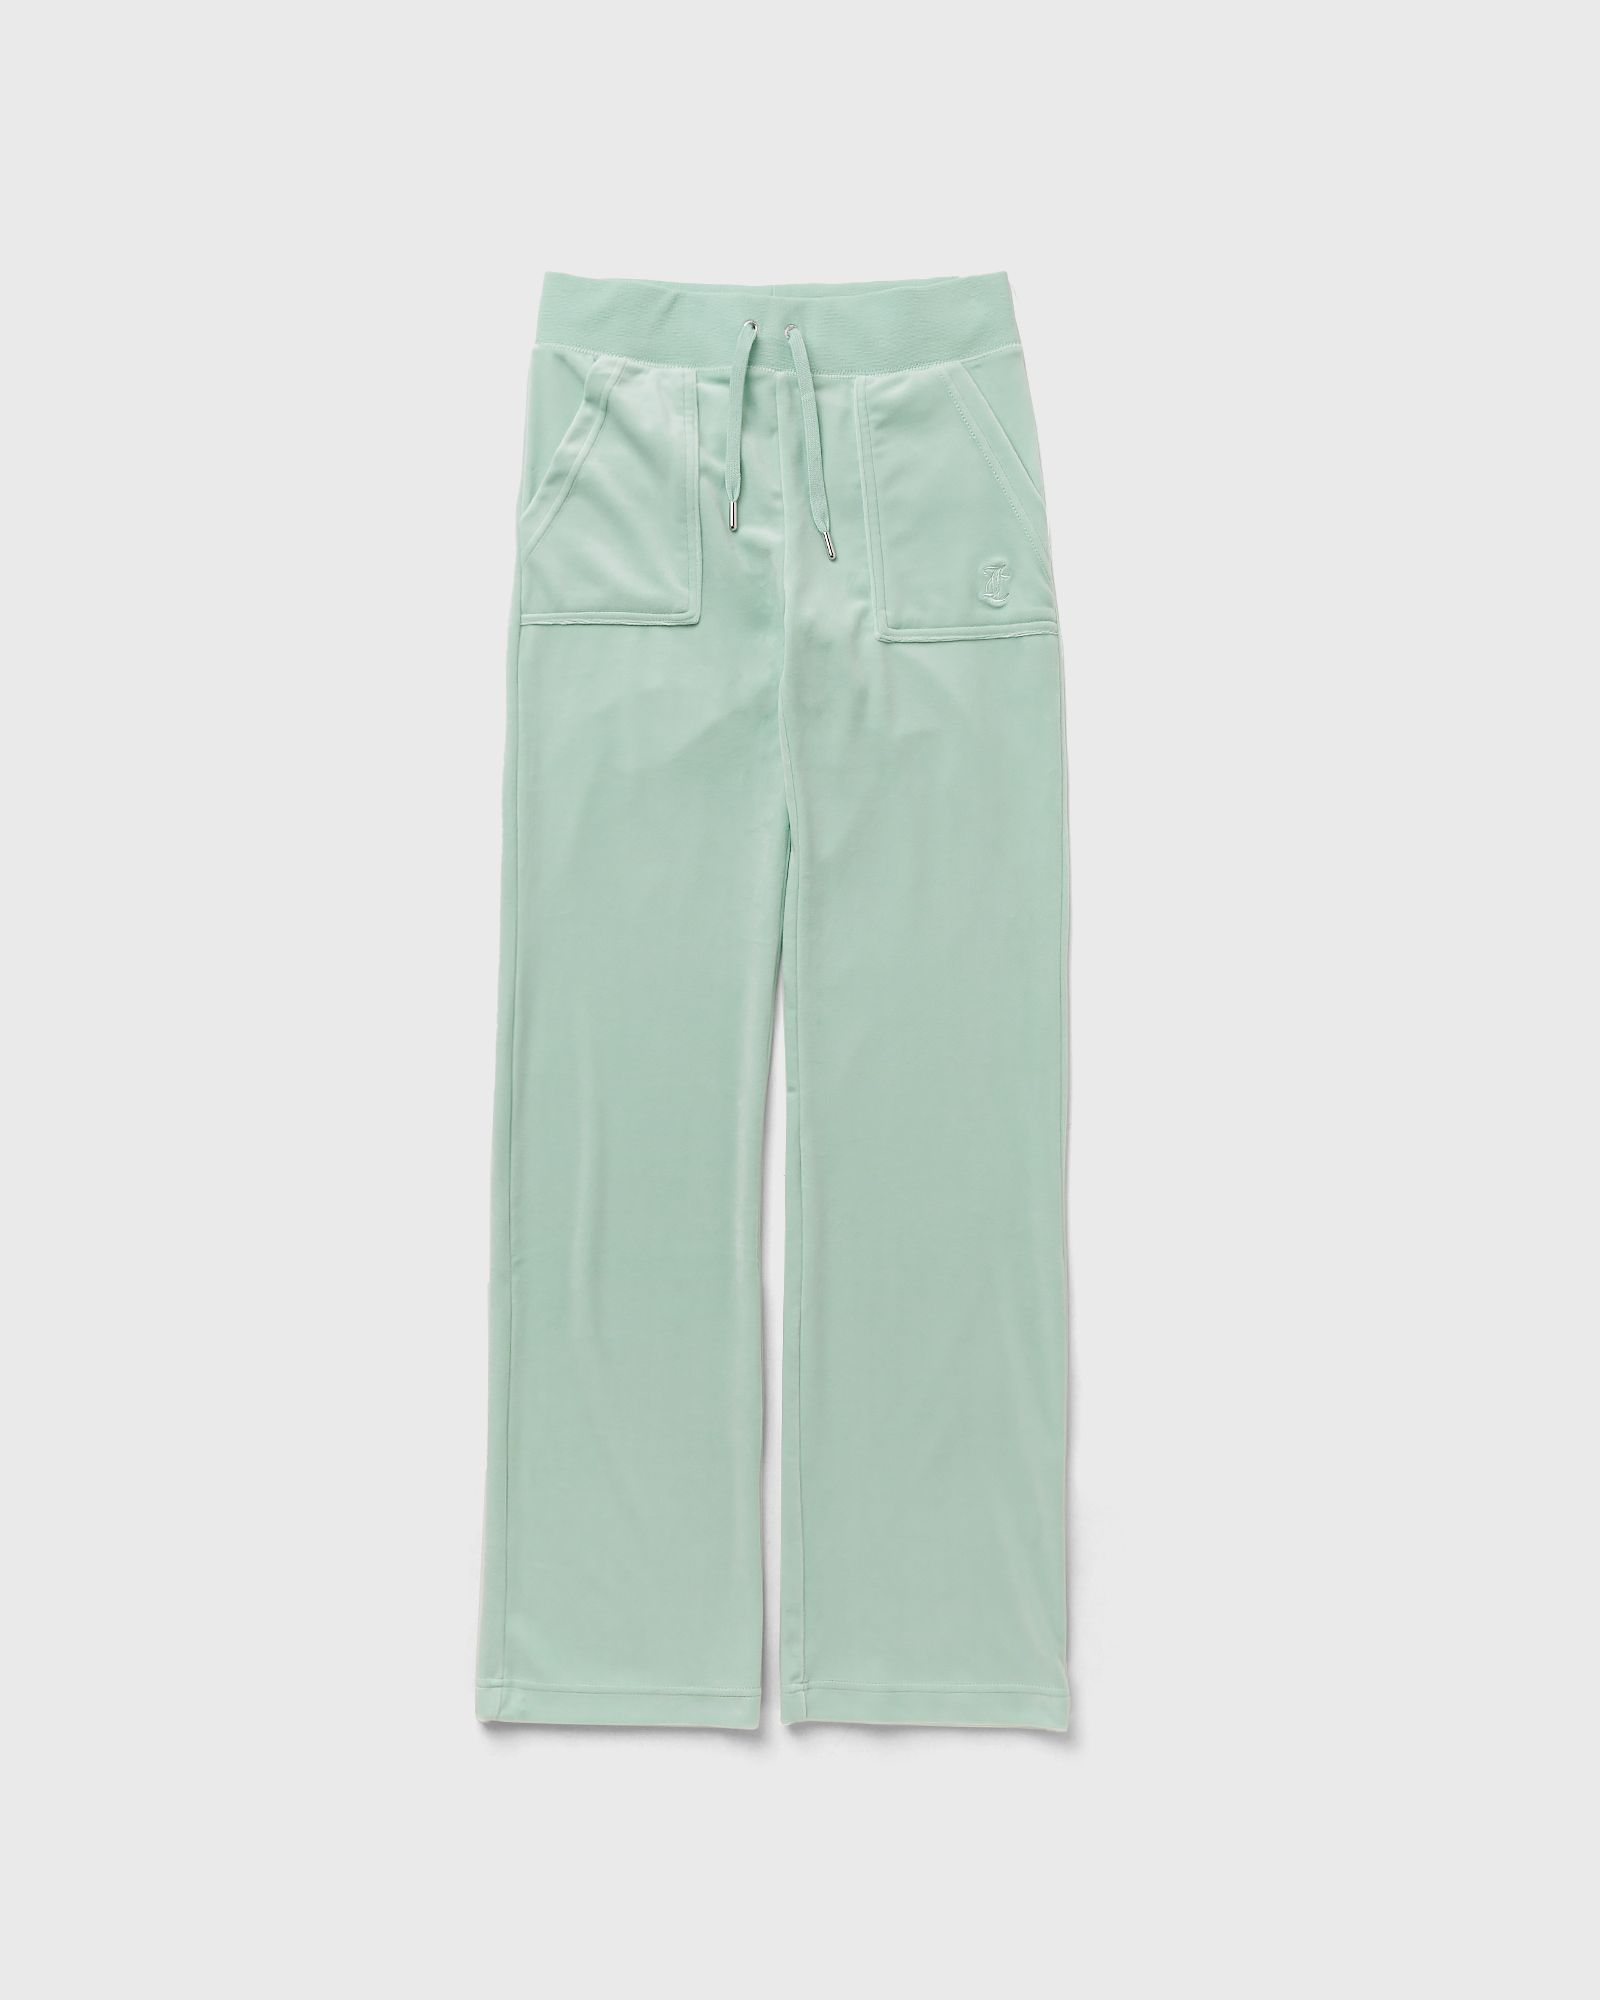 Juicy Couture - wmns classic velour del ray pant women sweatpants green in größe:m